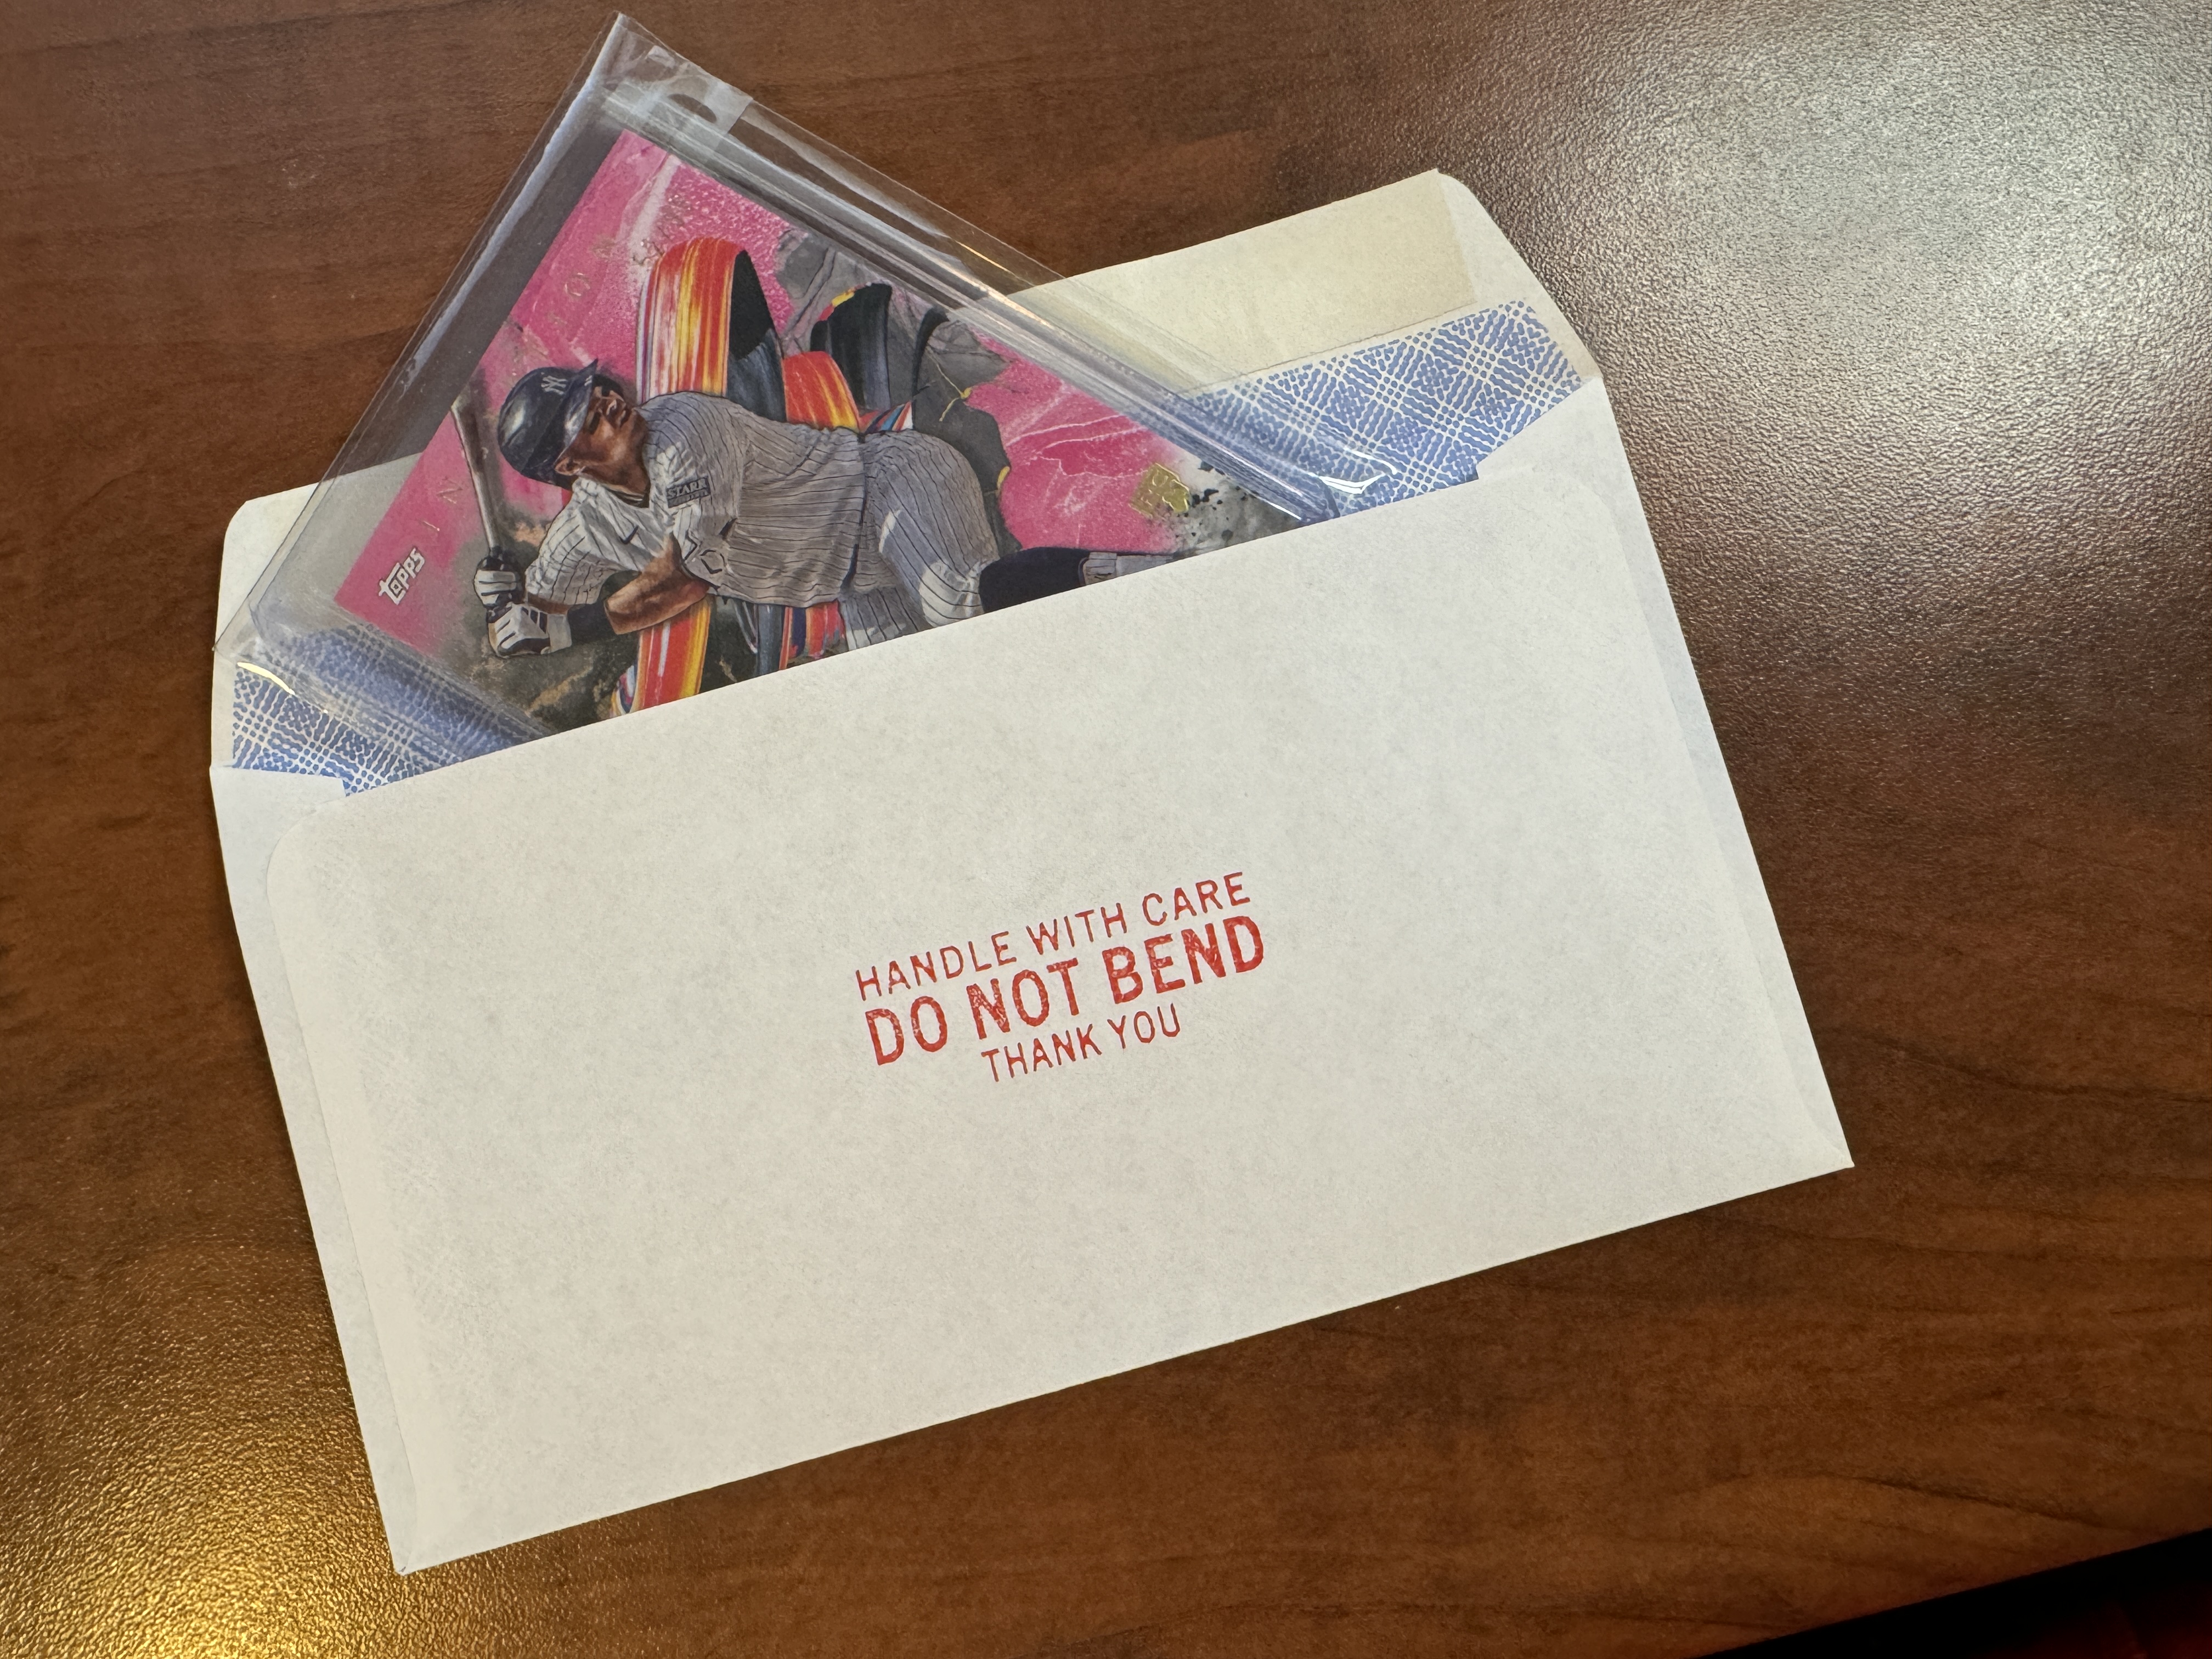 The fully protected baseball card being inserted into the envelope.